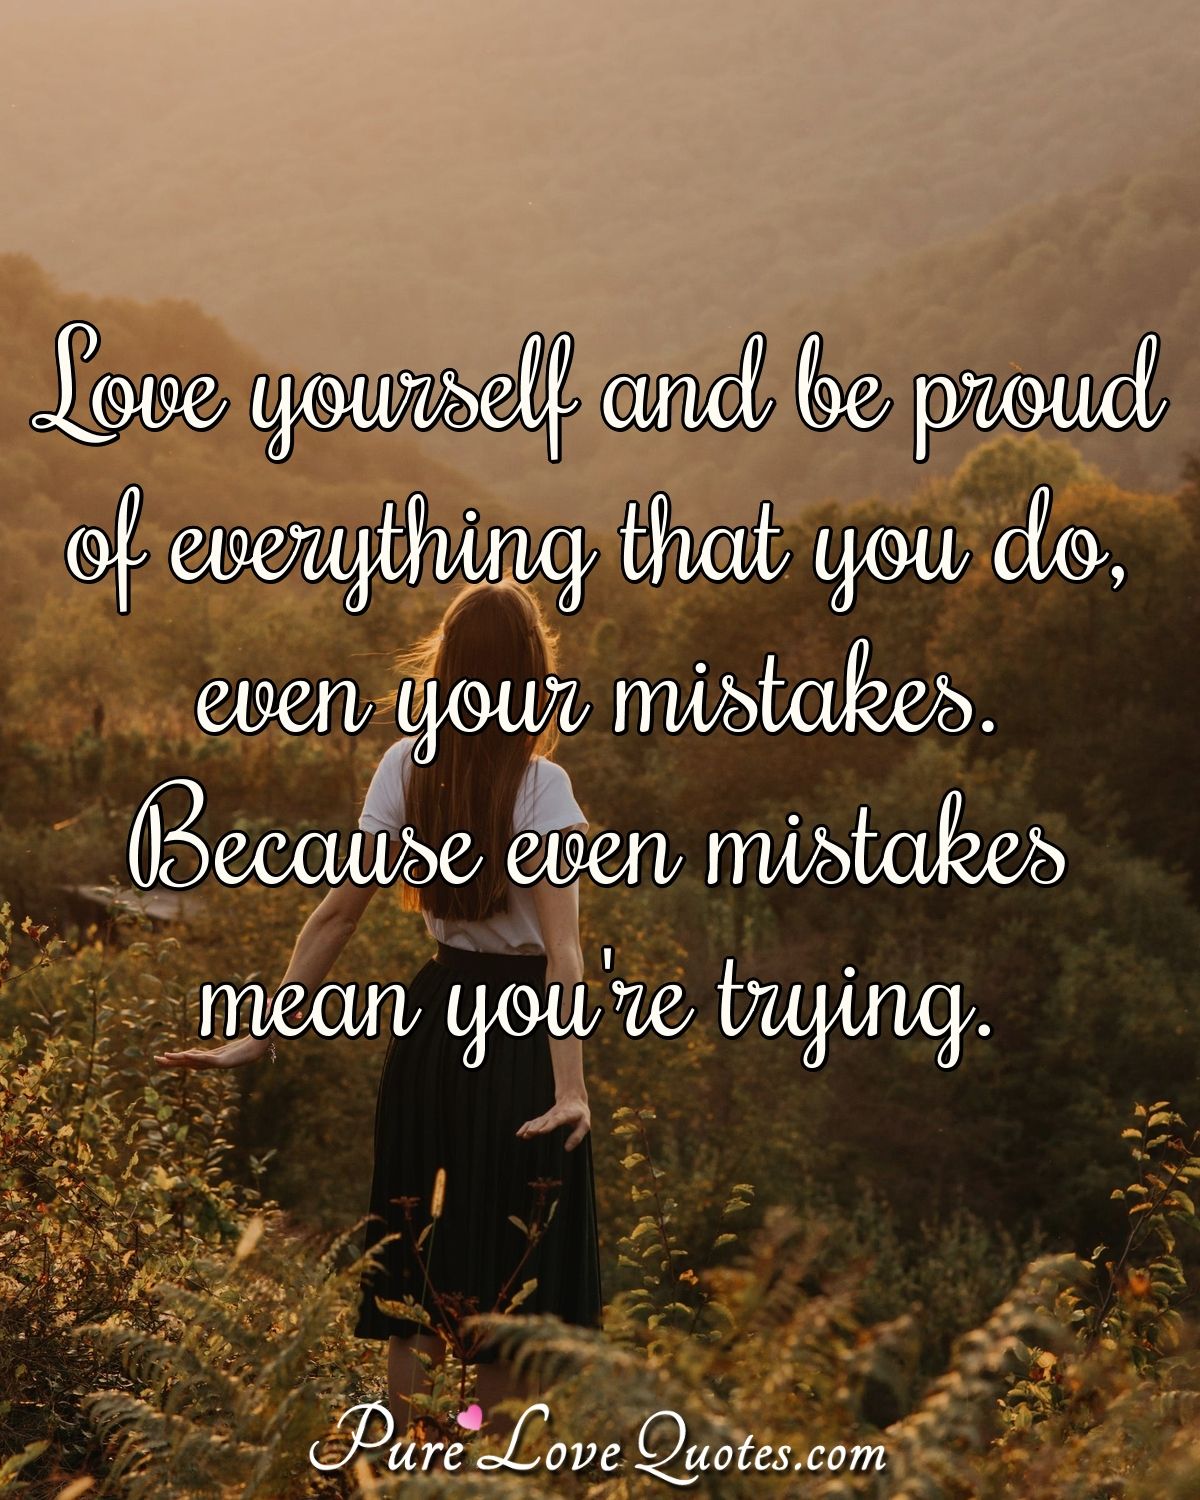 Love yourself and be proud of everything you do, even your mistakes, because your mistakes mean you're trying. - Anonymous